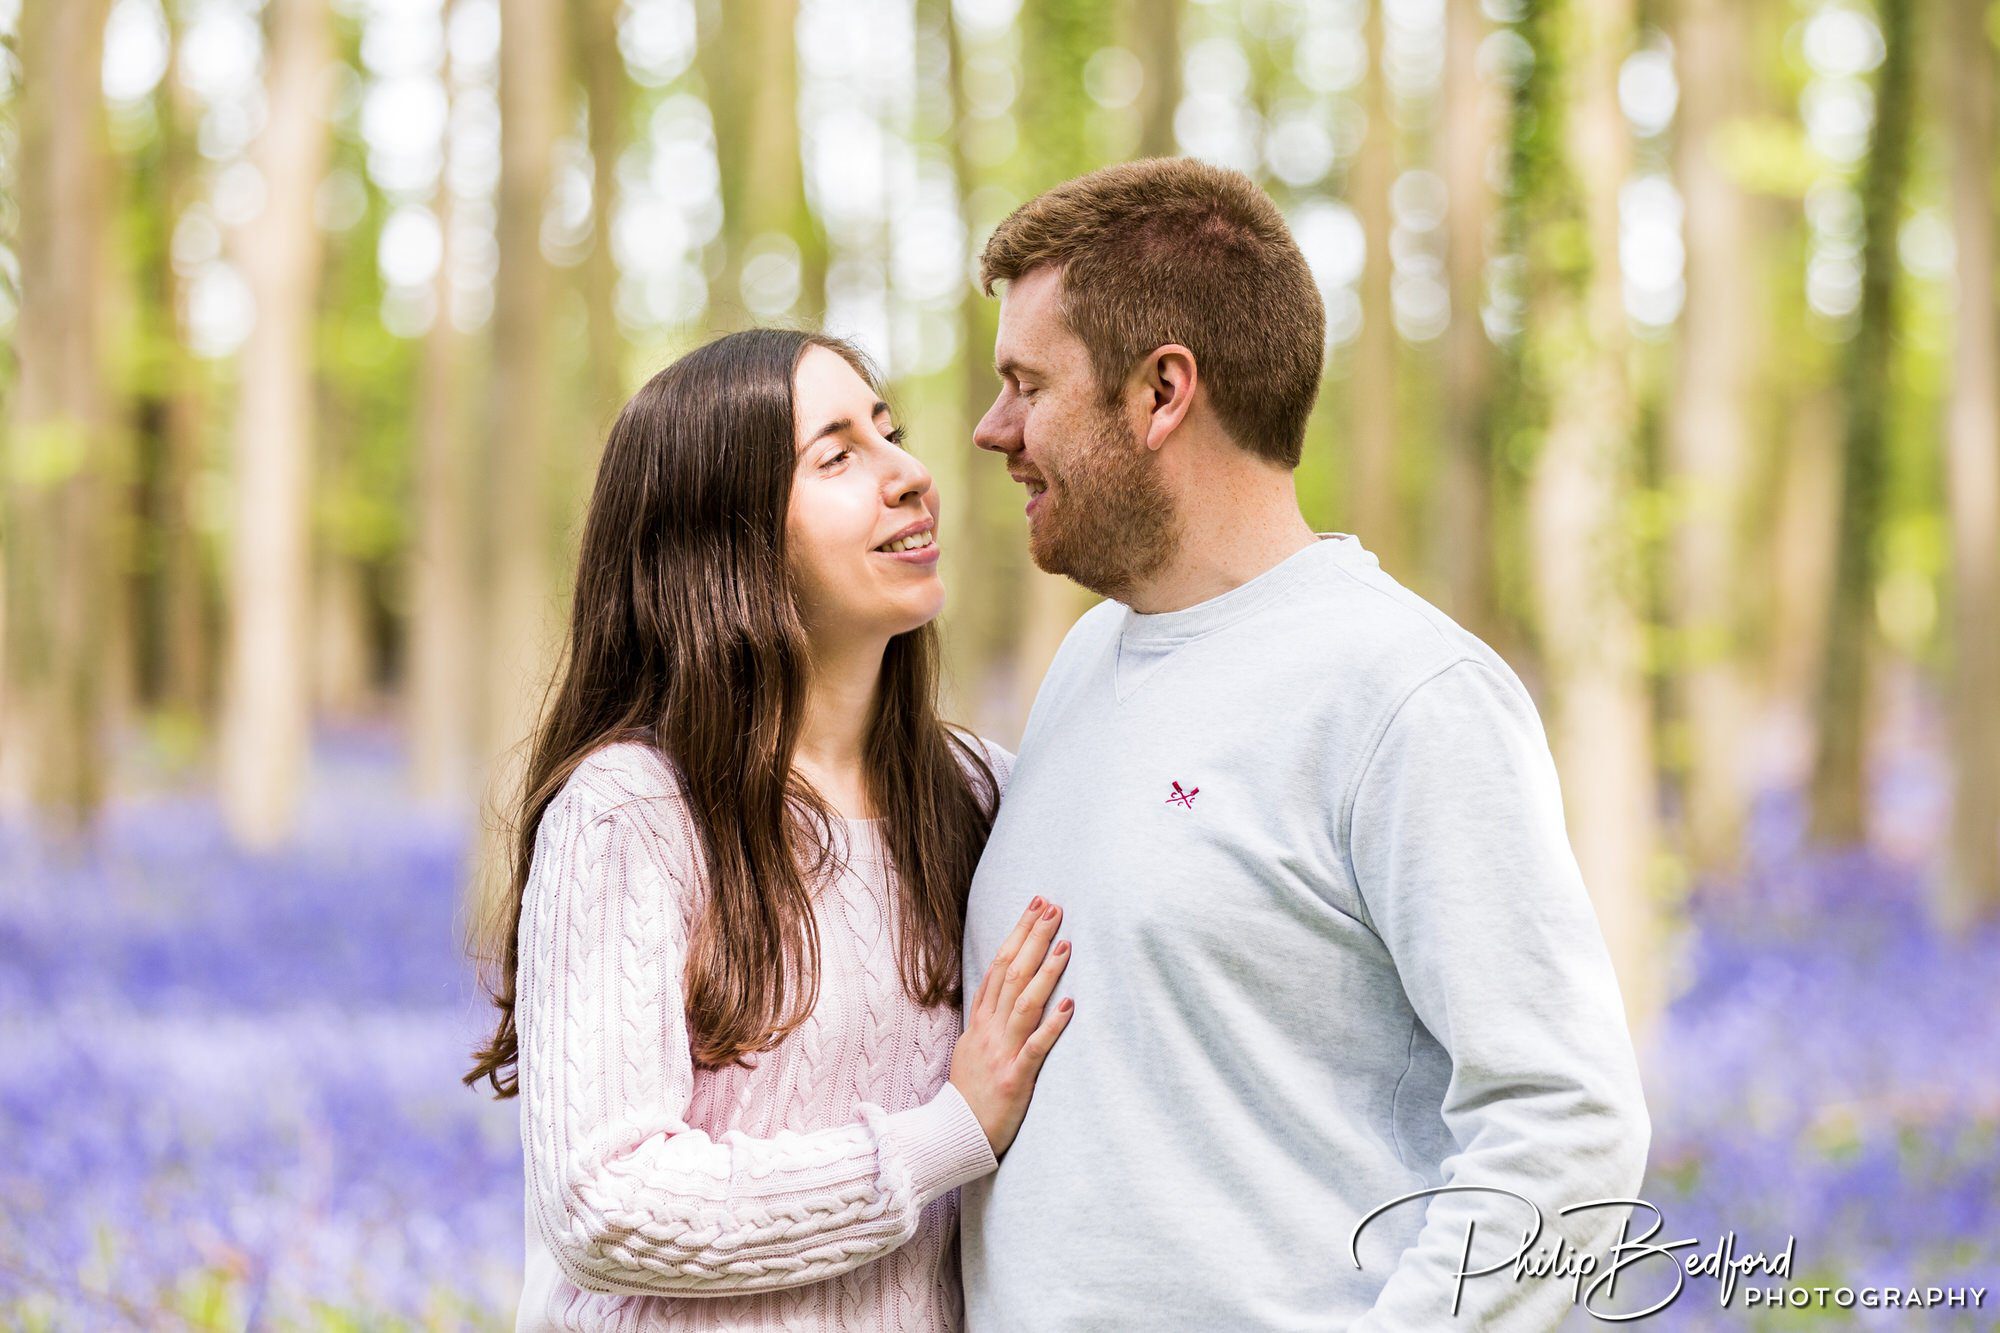 Man & Woman amongst Bluebells on a Engagement Shoot near Worthing, West Sussex